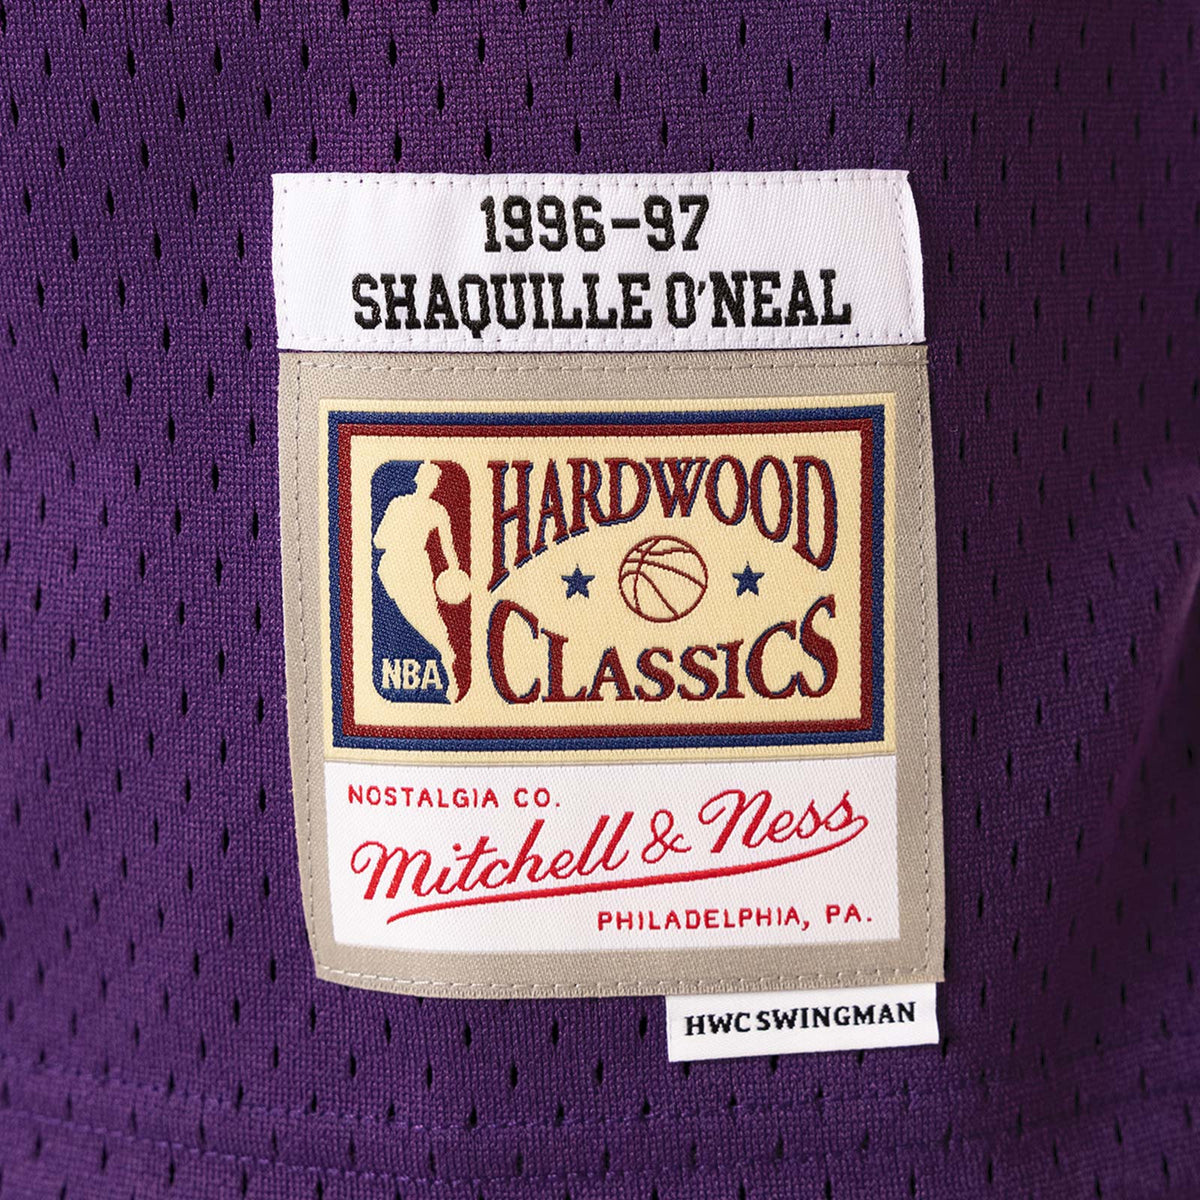 Shaquille O'Neal 96-97 Lakers Swingman Jersey, Mitchell & Ness